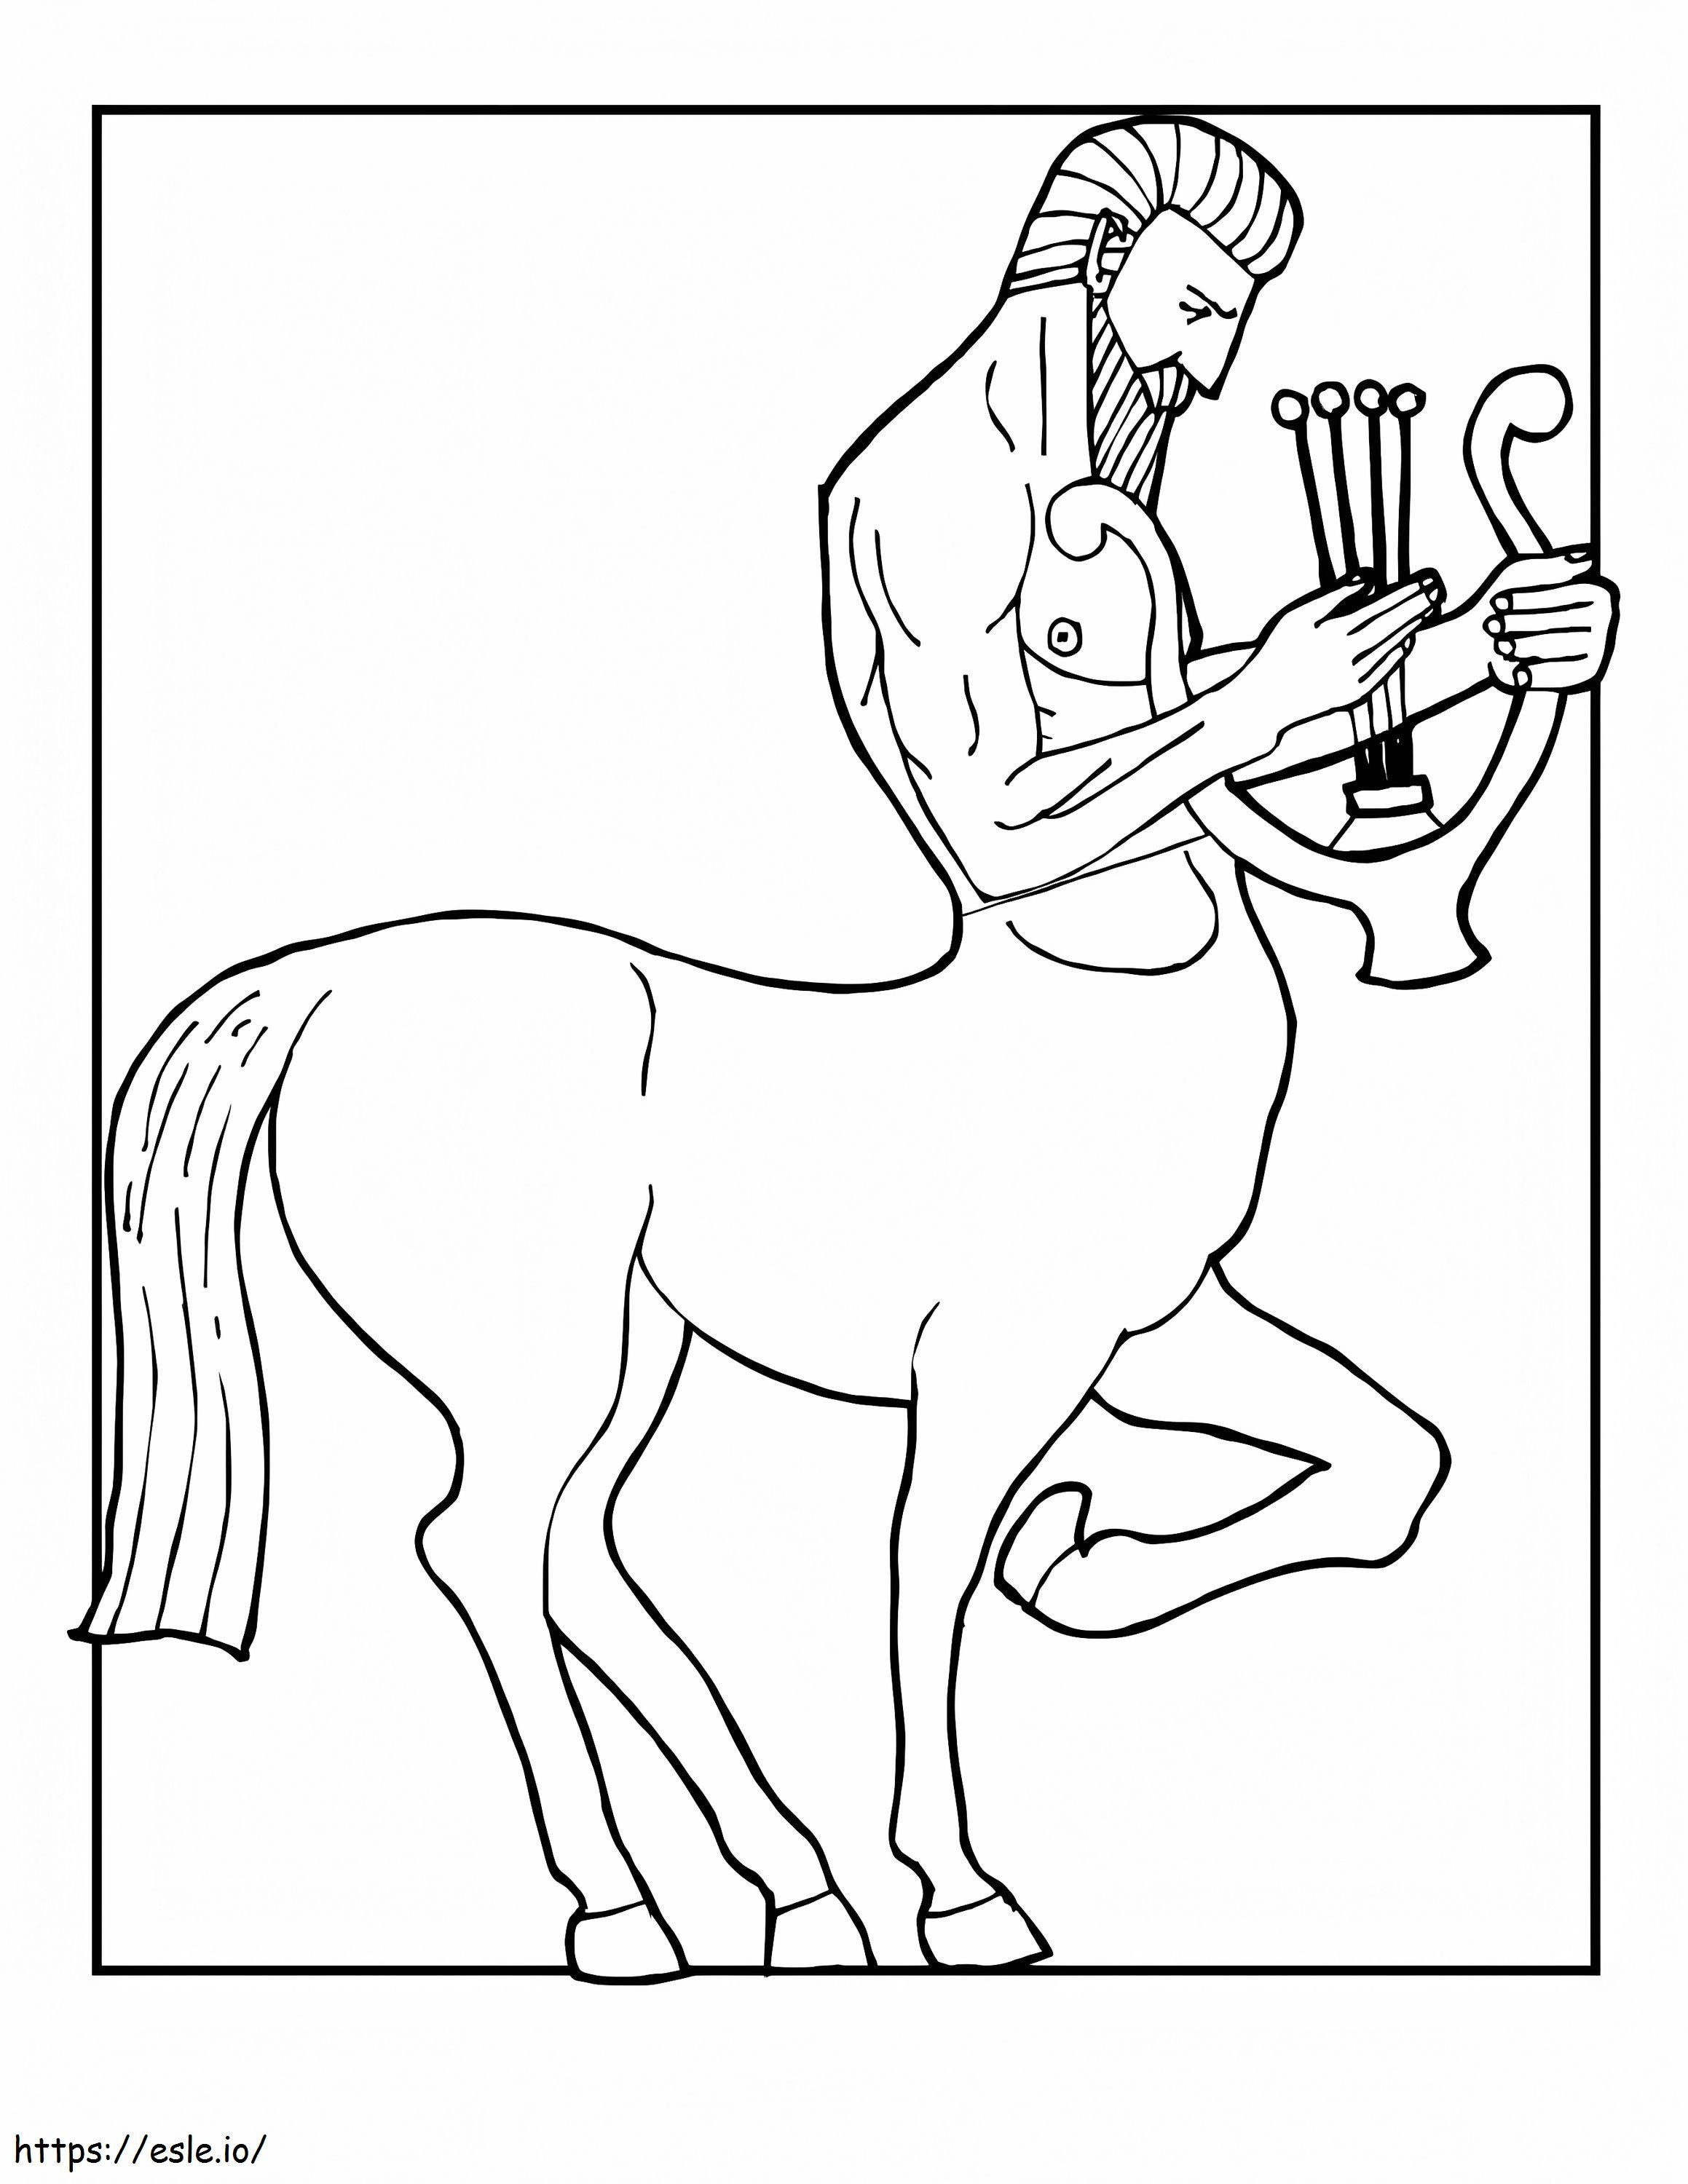 Centaur With Harp coloring page